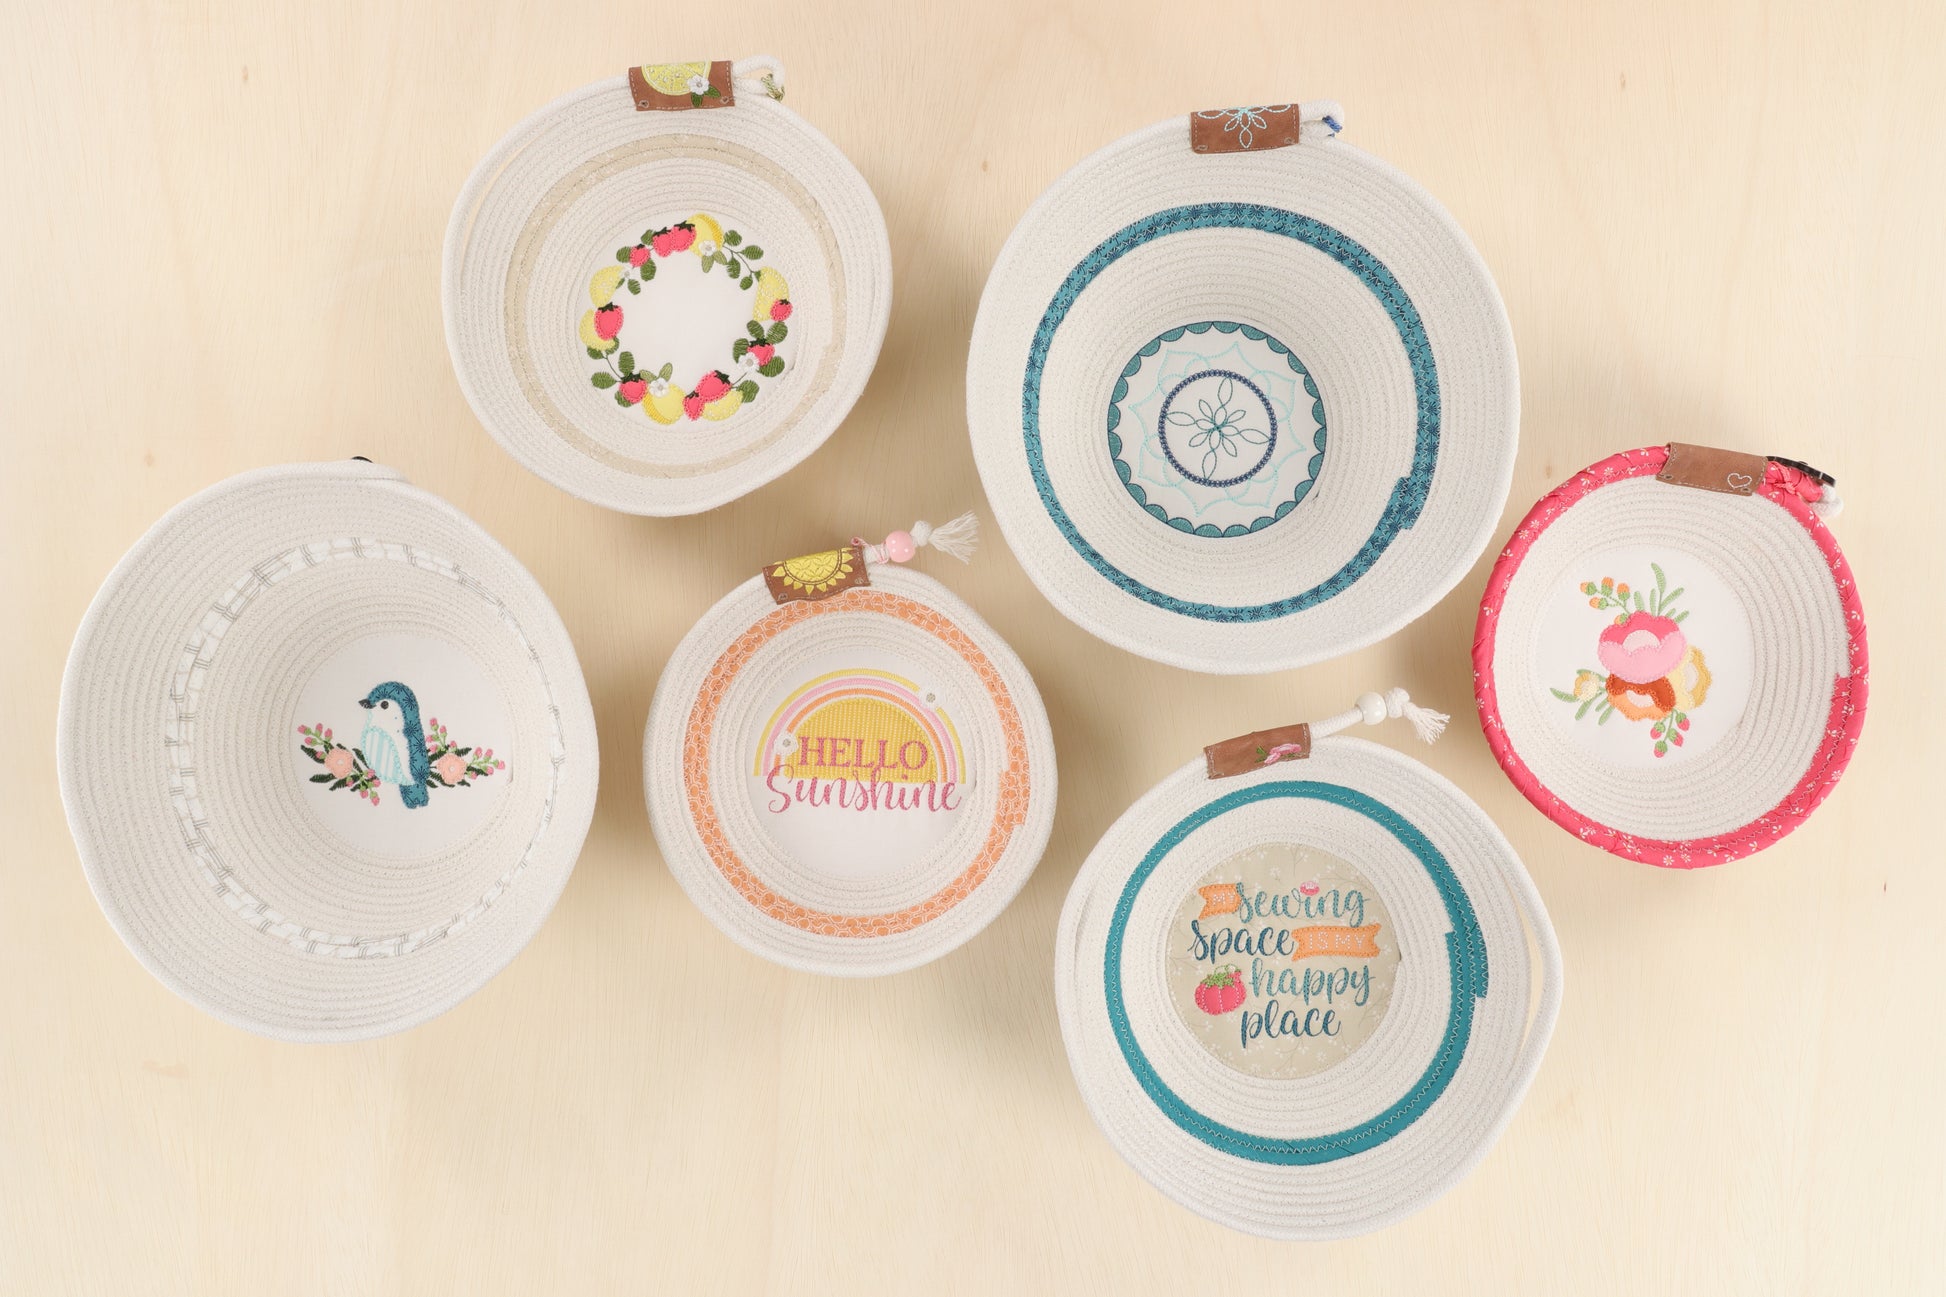 With Kimberbell’s Happy Place Embroidery Projects (KD5134), create rope bowls with 6 unique designs in multiple sizes. The photo shows an example of each finished design.